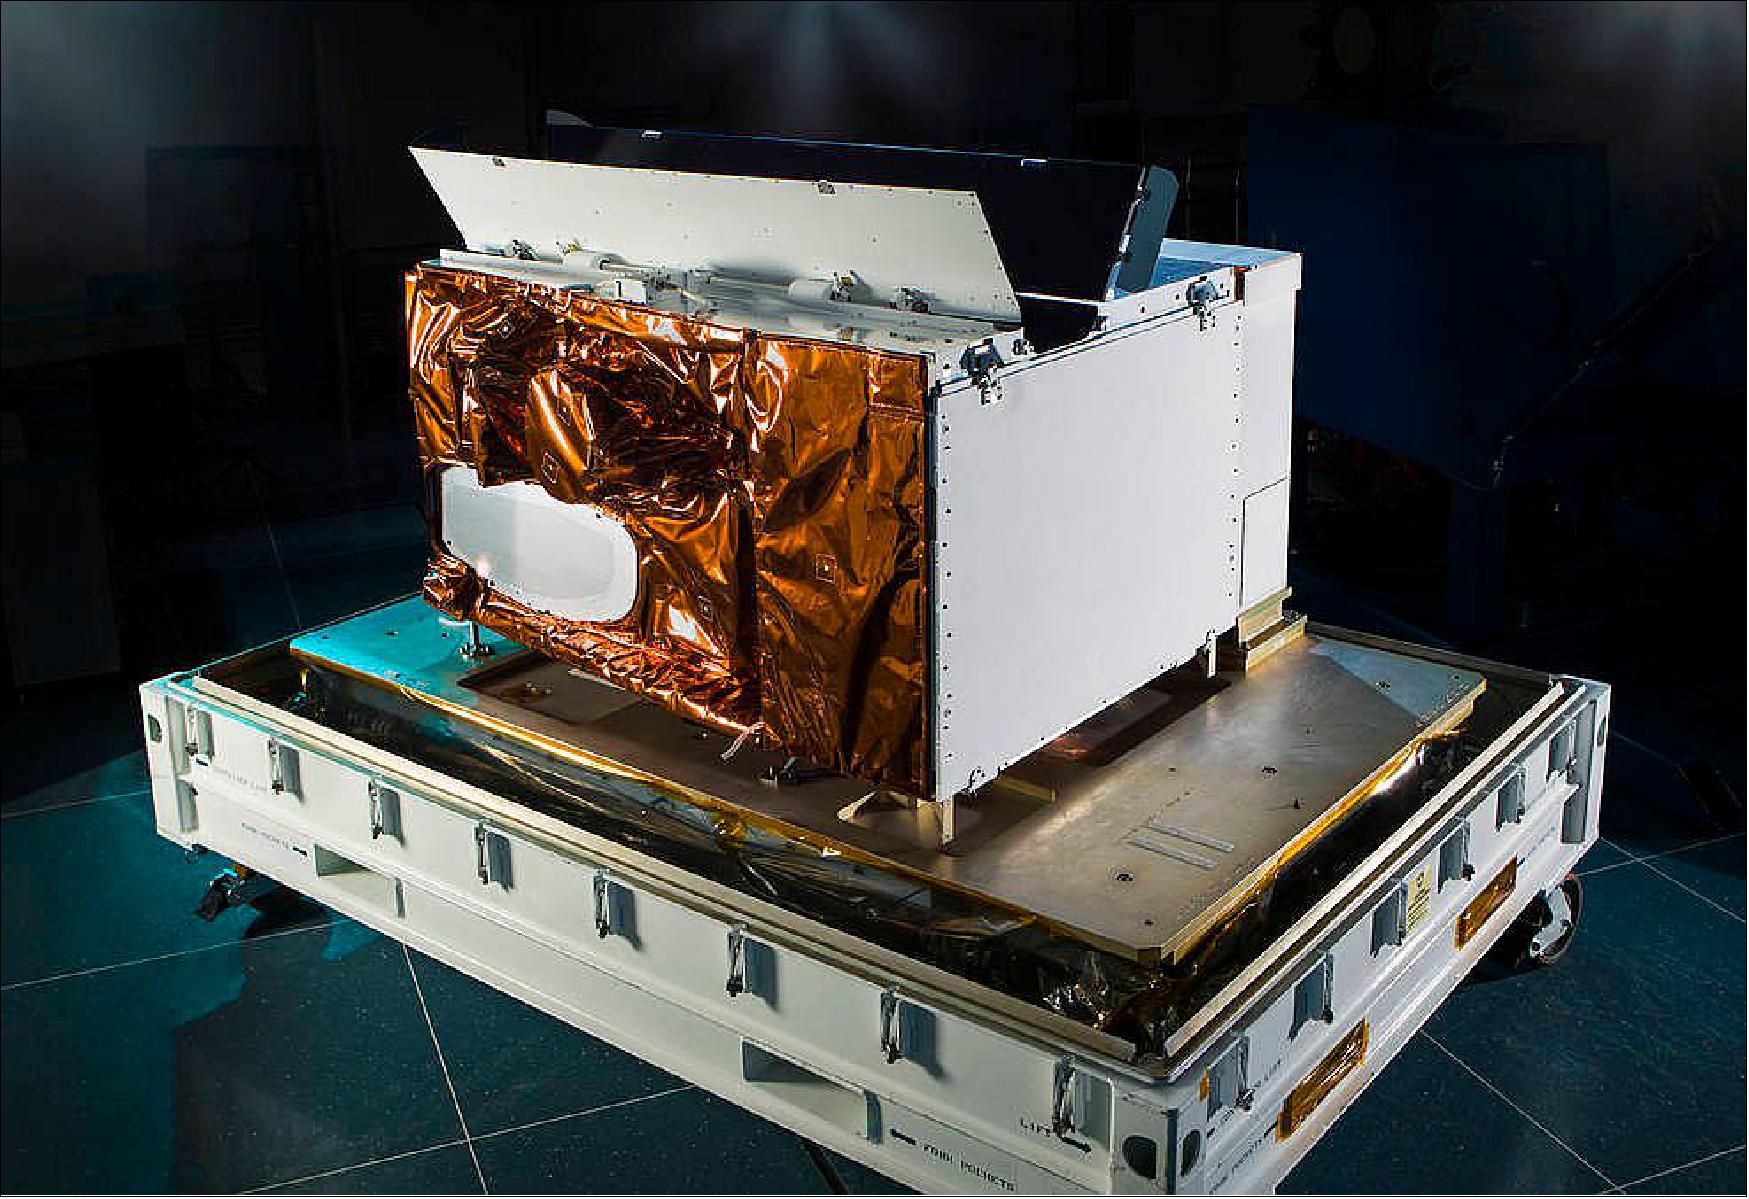 Figure 9: The VIIRS instrument photographed prior to shipping (image credit: Raytheon Intelligence & Space)